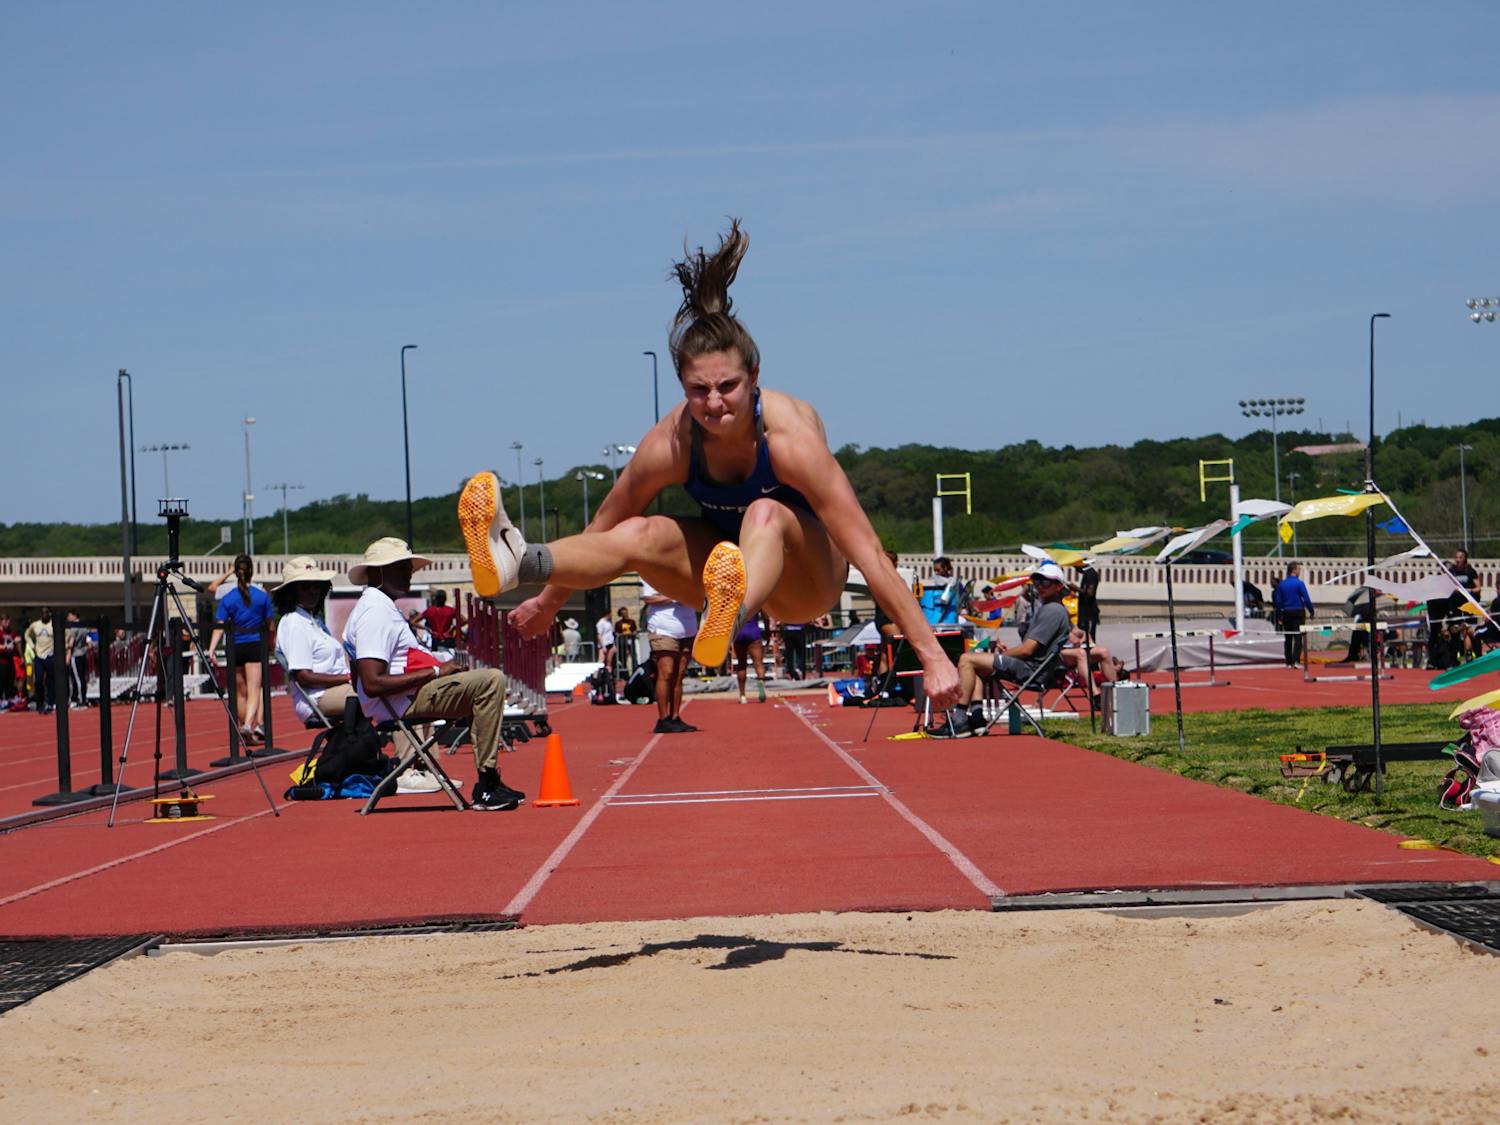 Fifth-year Christina Wende set the school record in the women’s long jump at 20-5 1/4. The previous record was set in 2009. &nbsp;